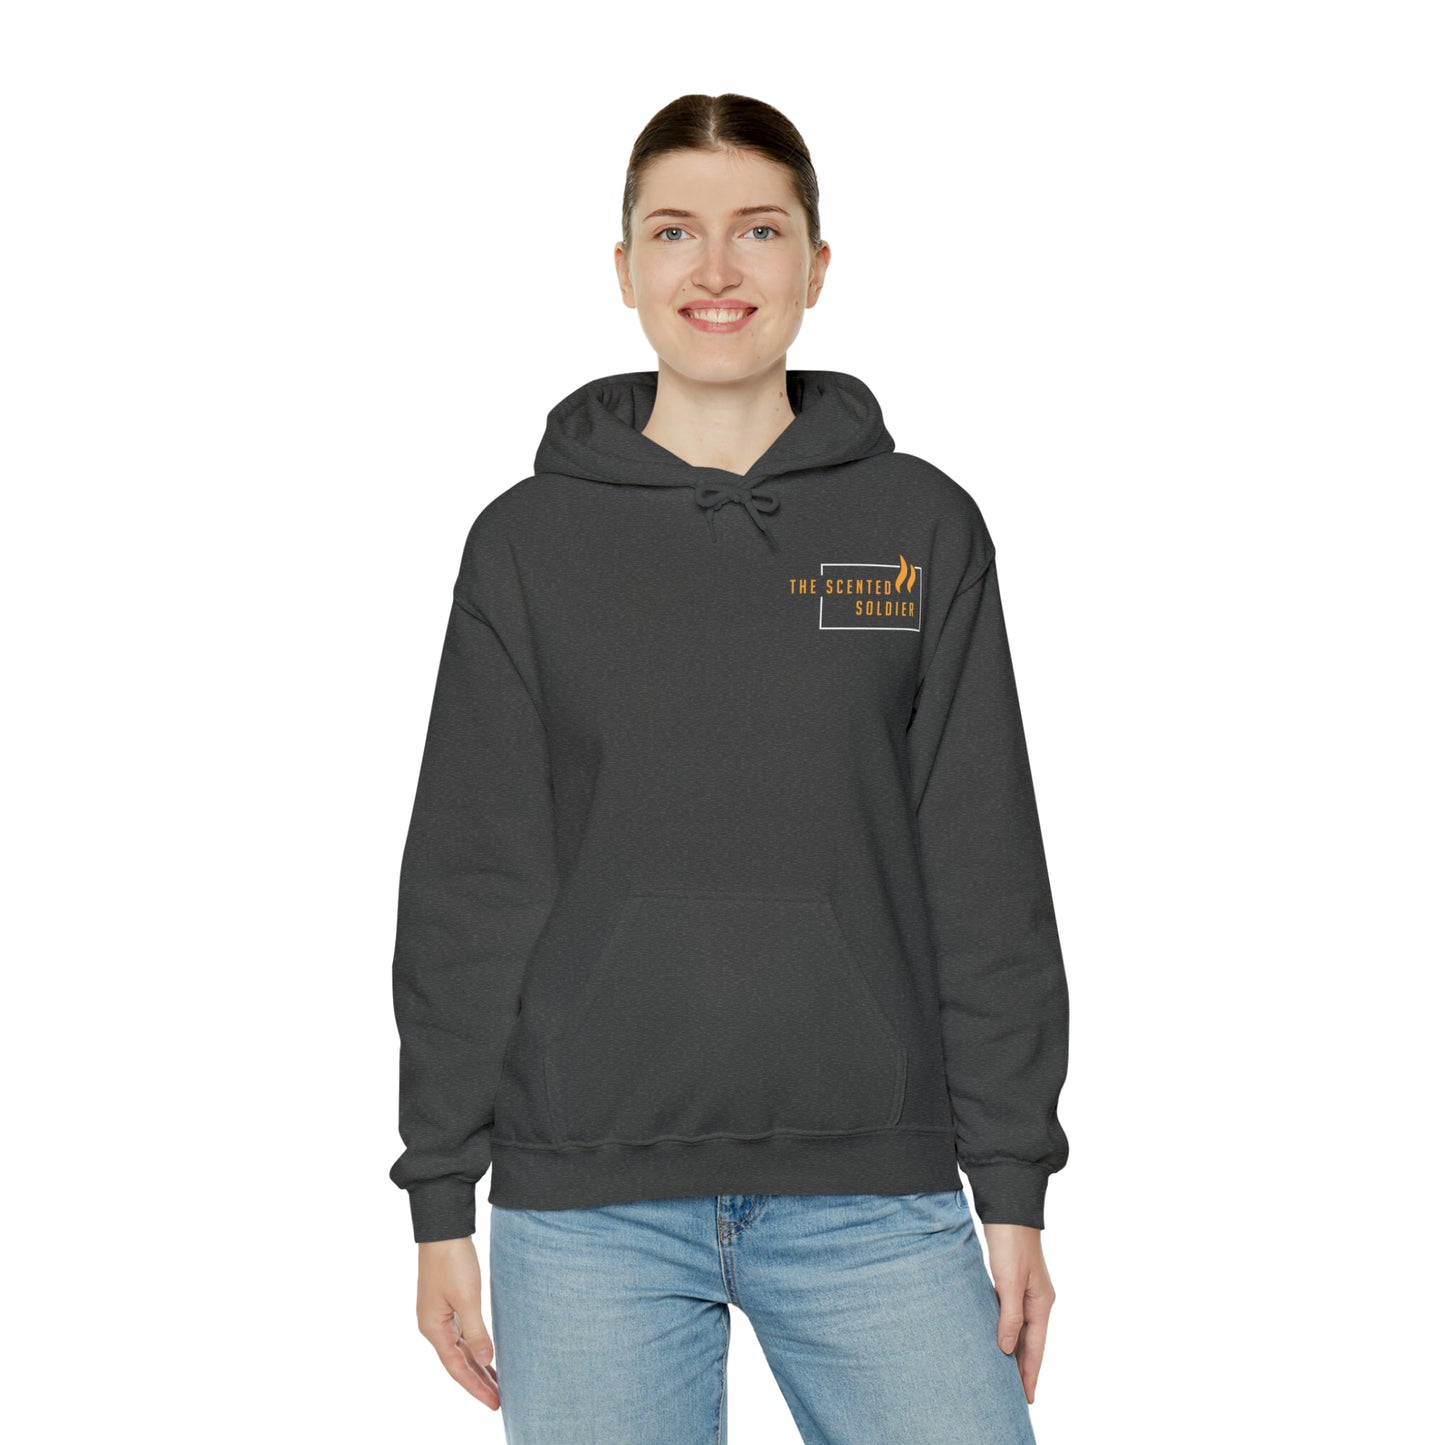 The Scented Soldier Unisex Heavy Blend™ Hooded Sweatshirt